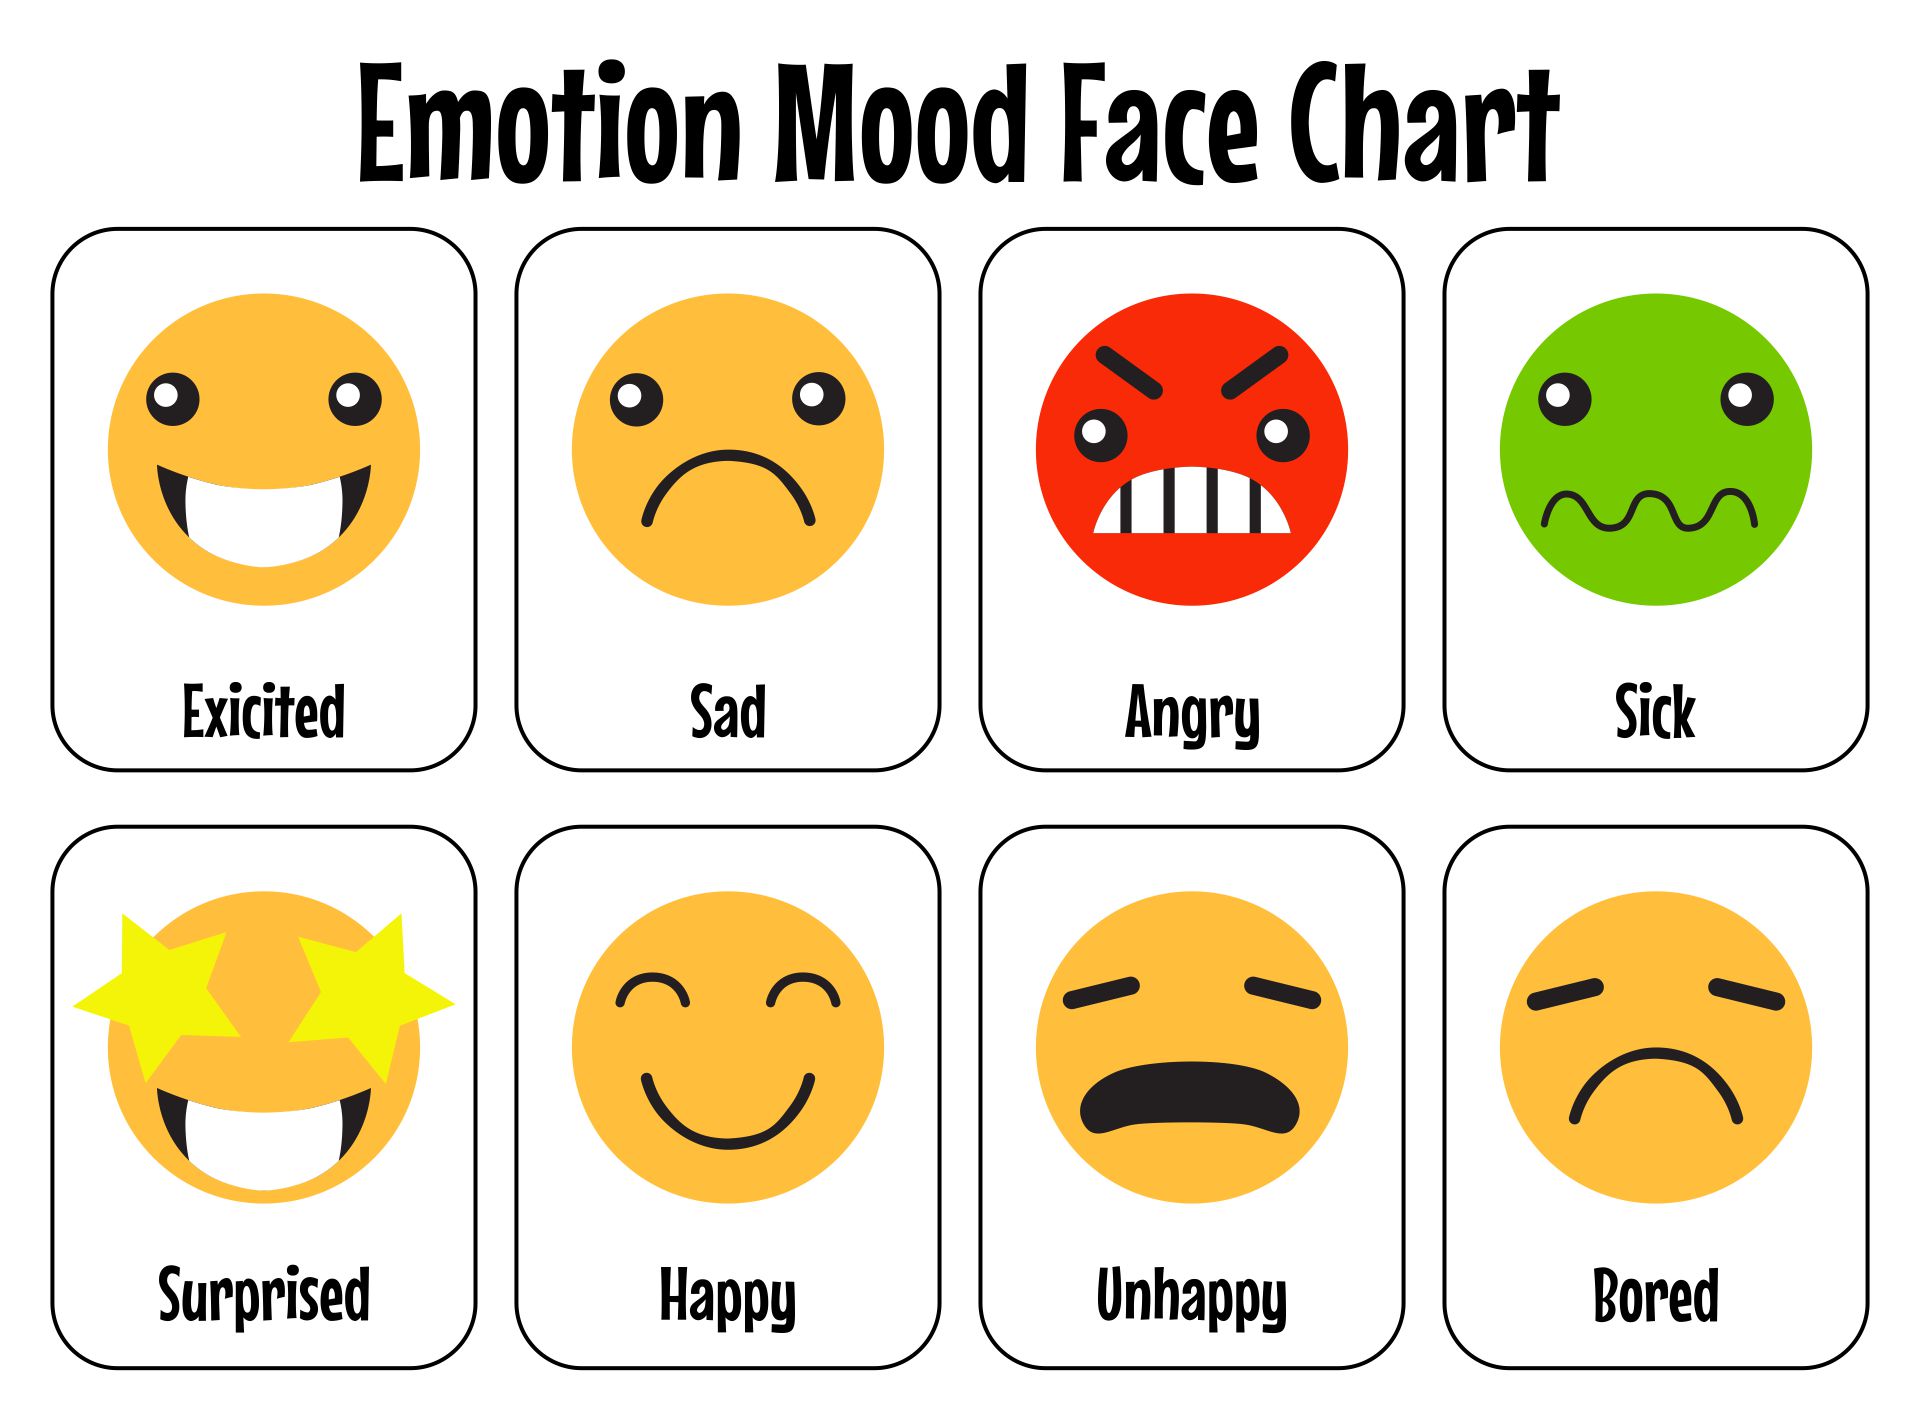 right-now-i-feel-feelings-chart-emotion-faces-emotion-chart